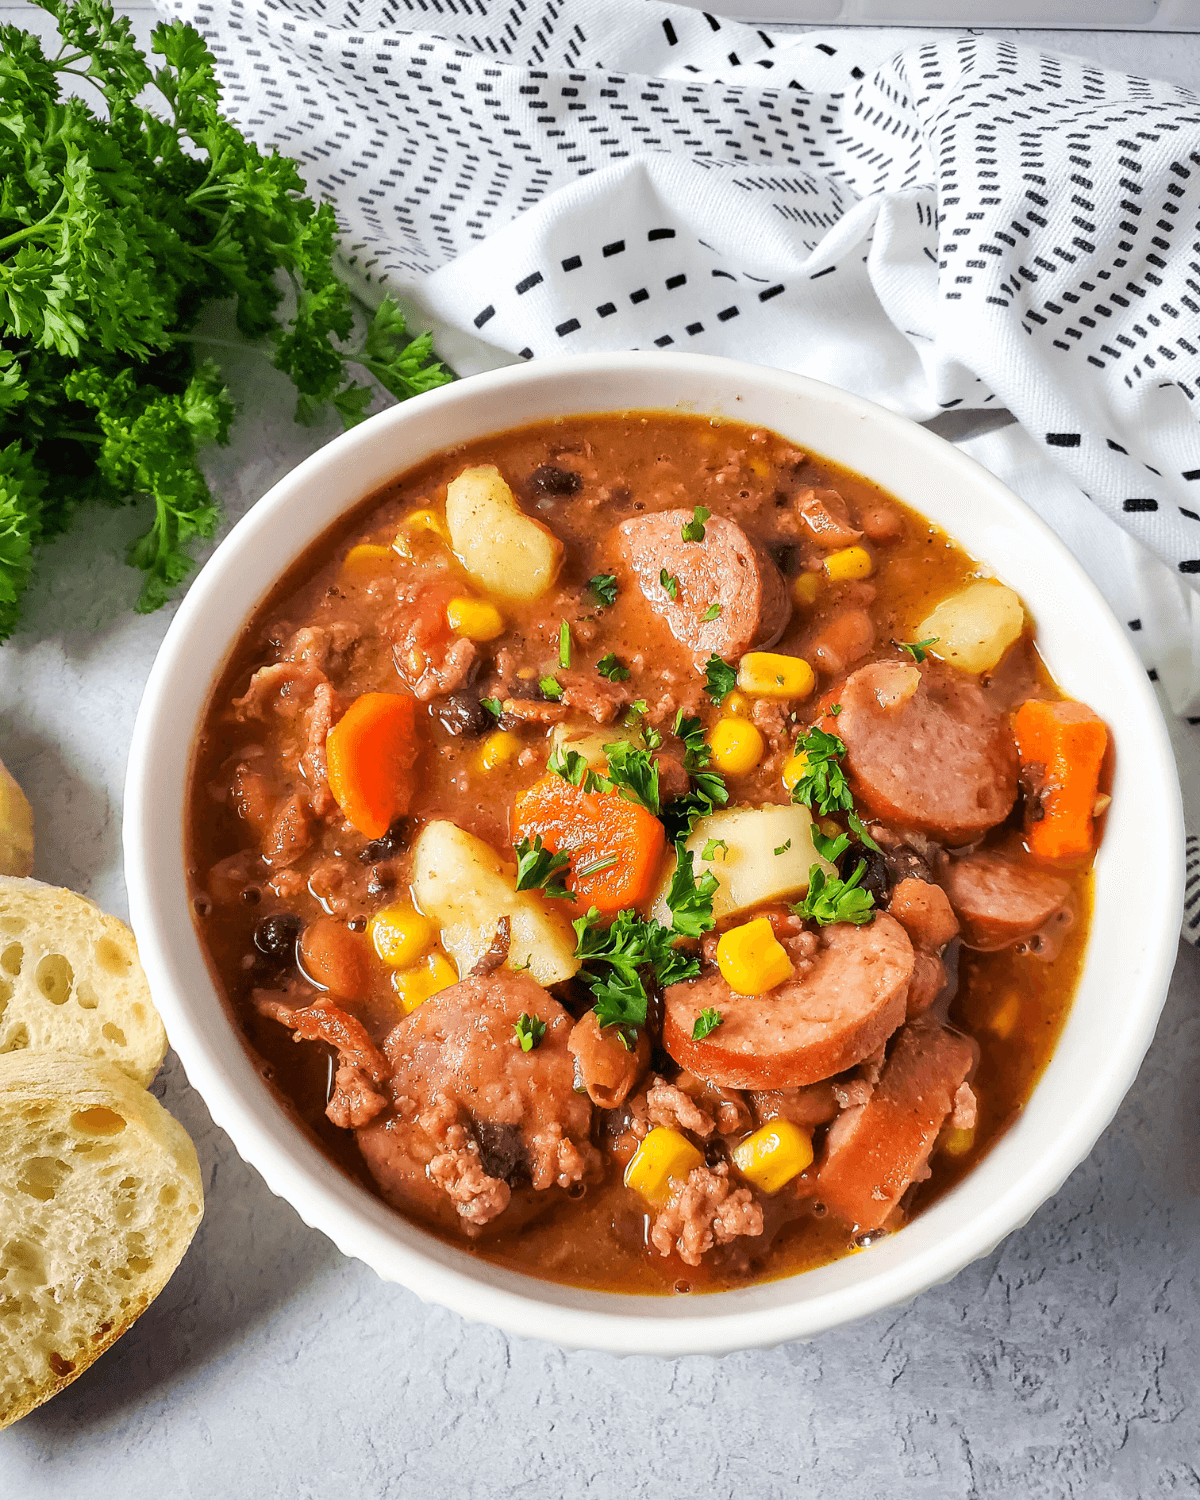 A bowl of cowboy stew with corn, beans and sausage.